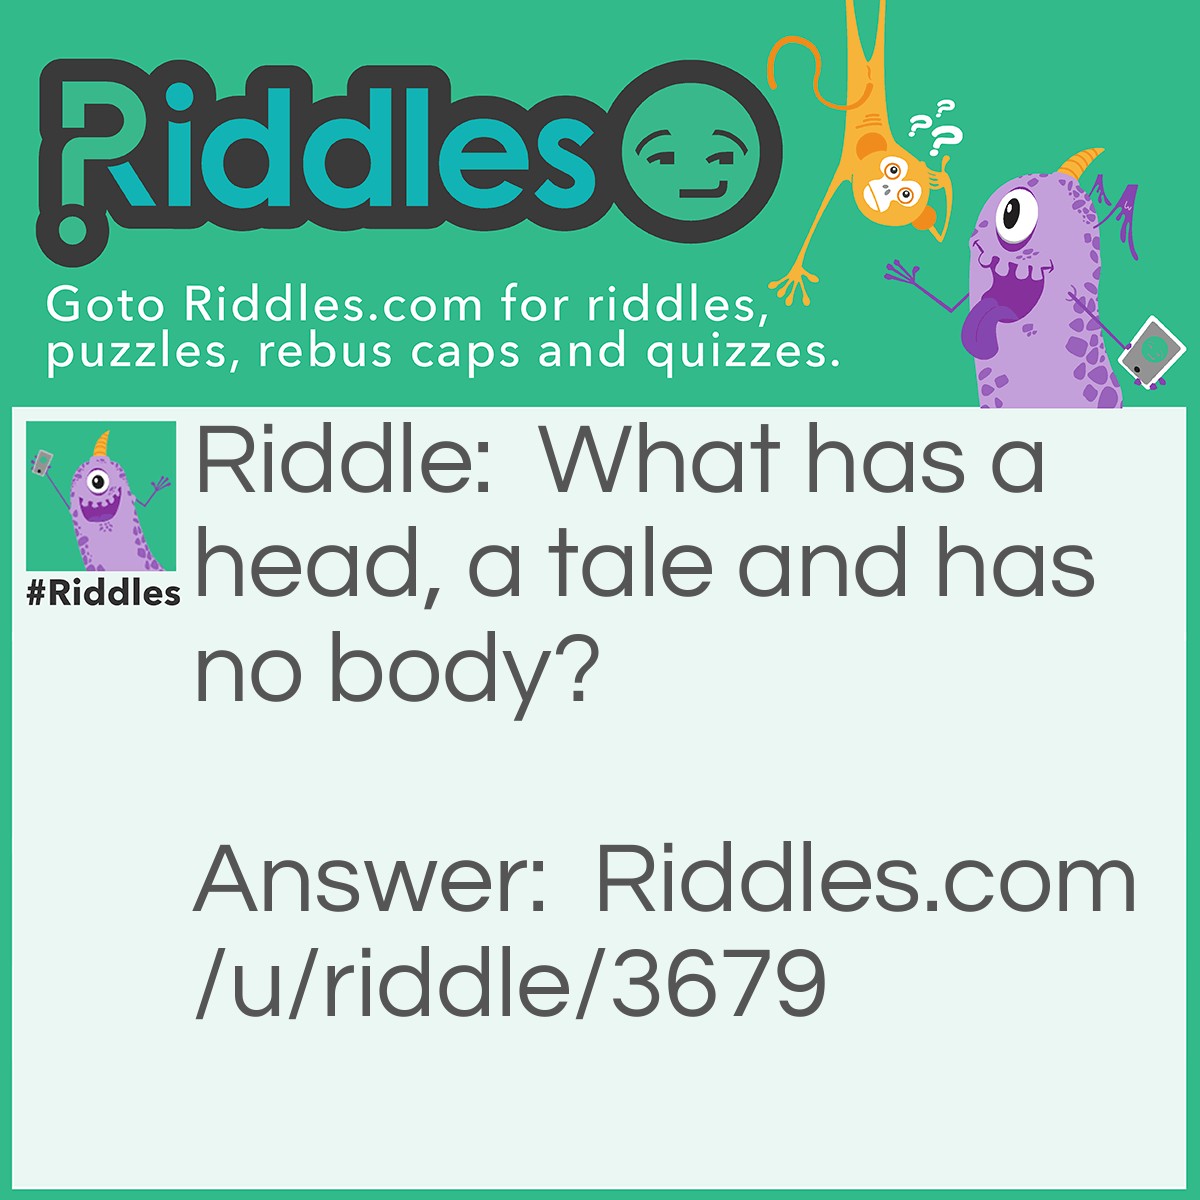 Riddle: What has a head, a tale, and has no body? Answer: A coin!